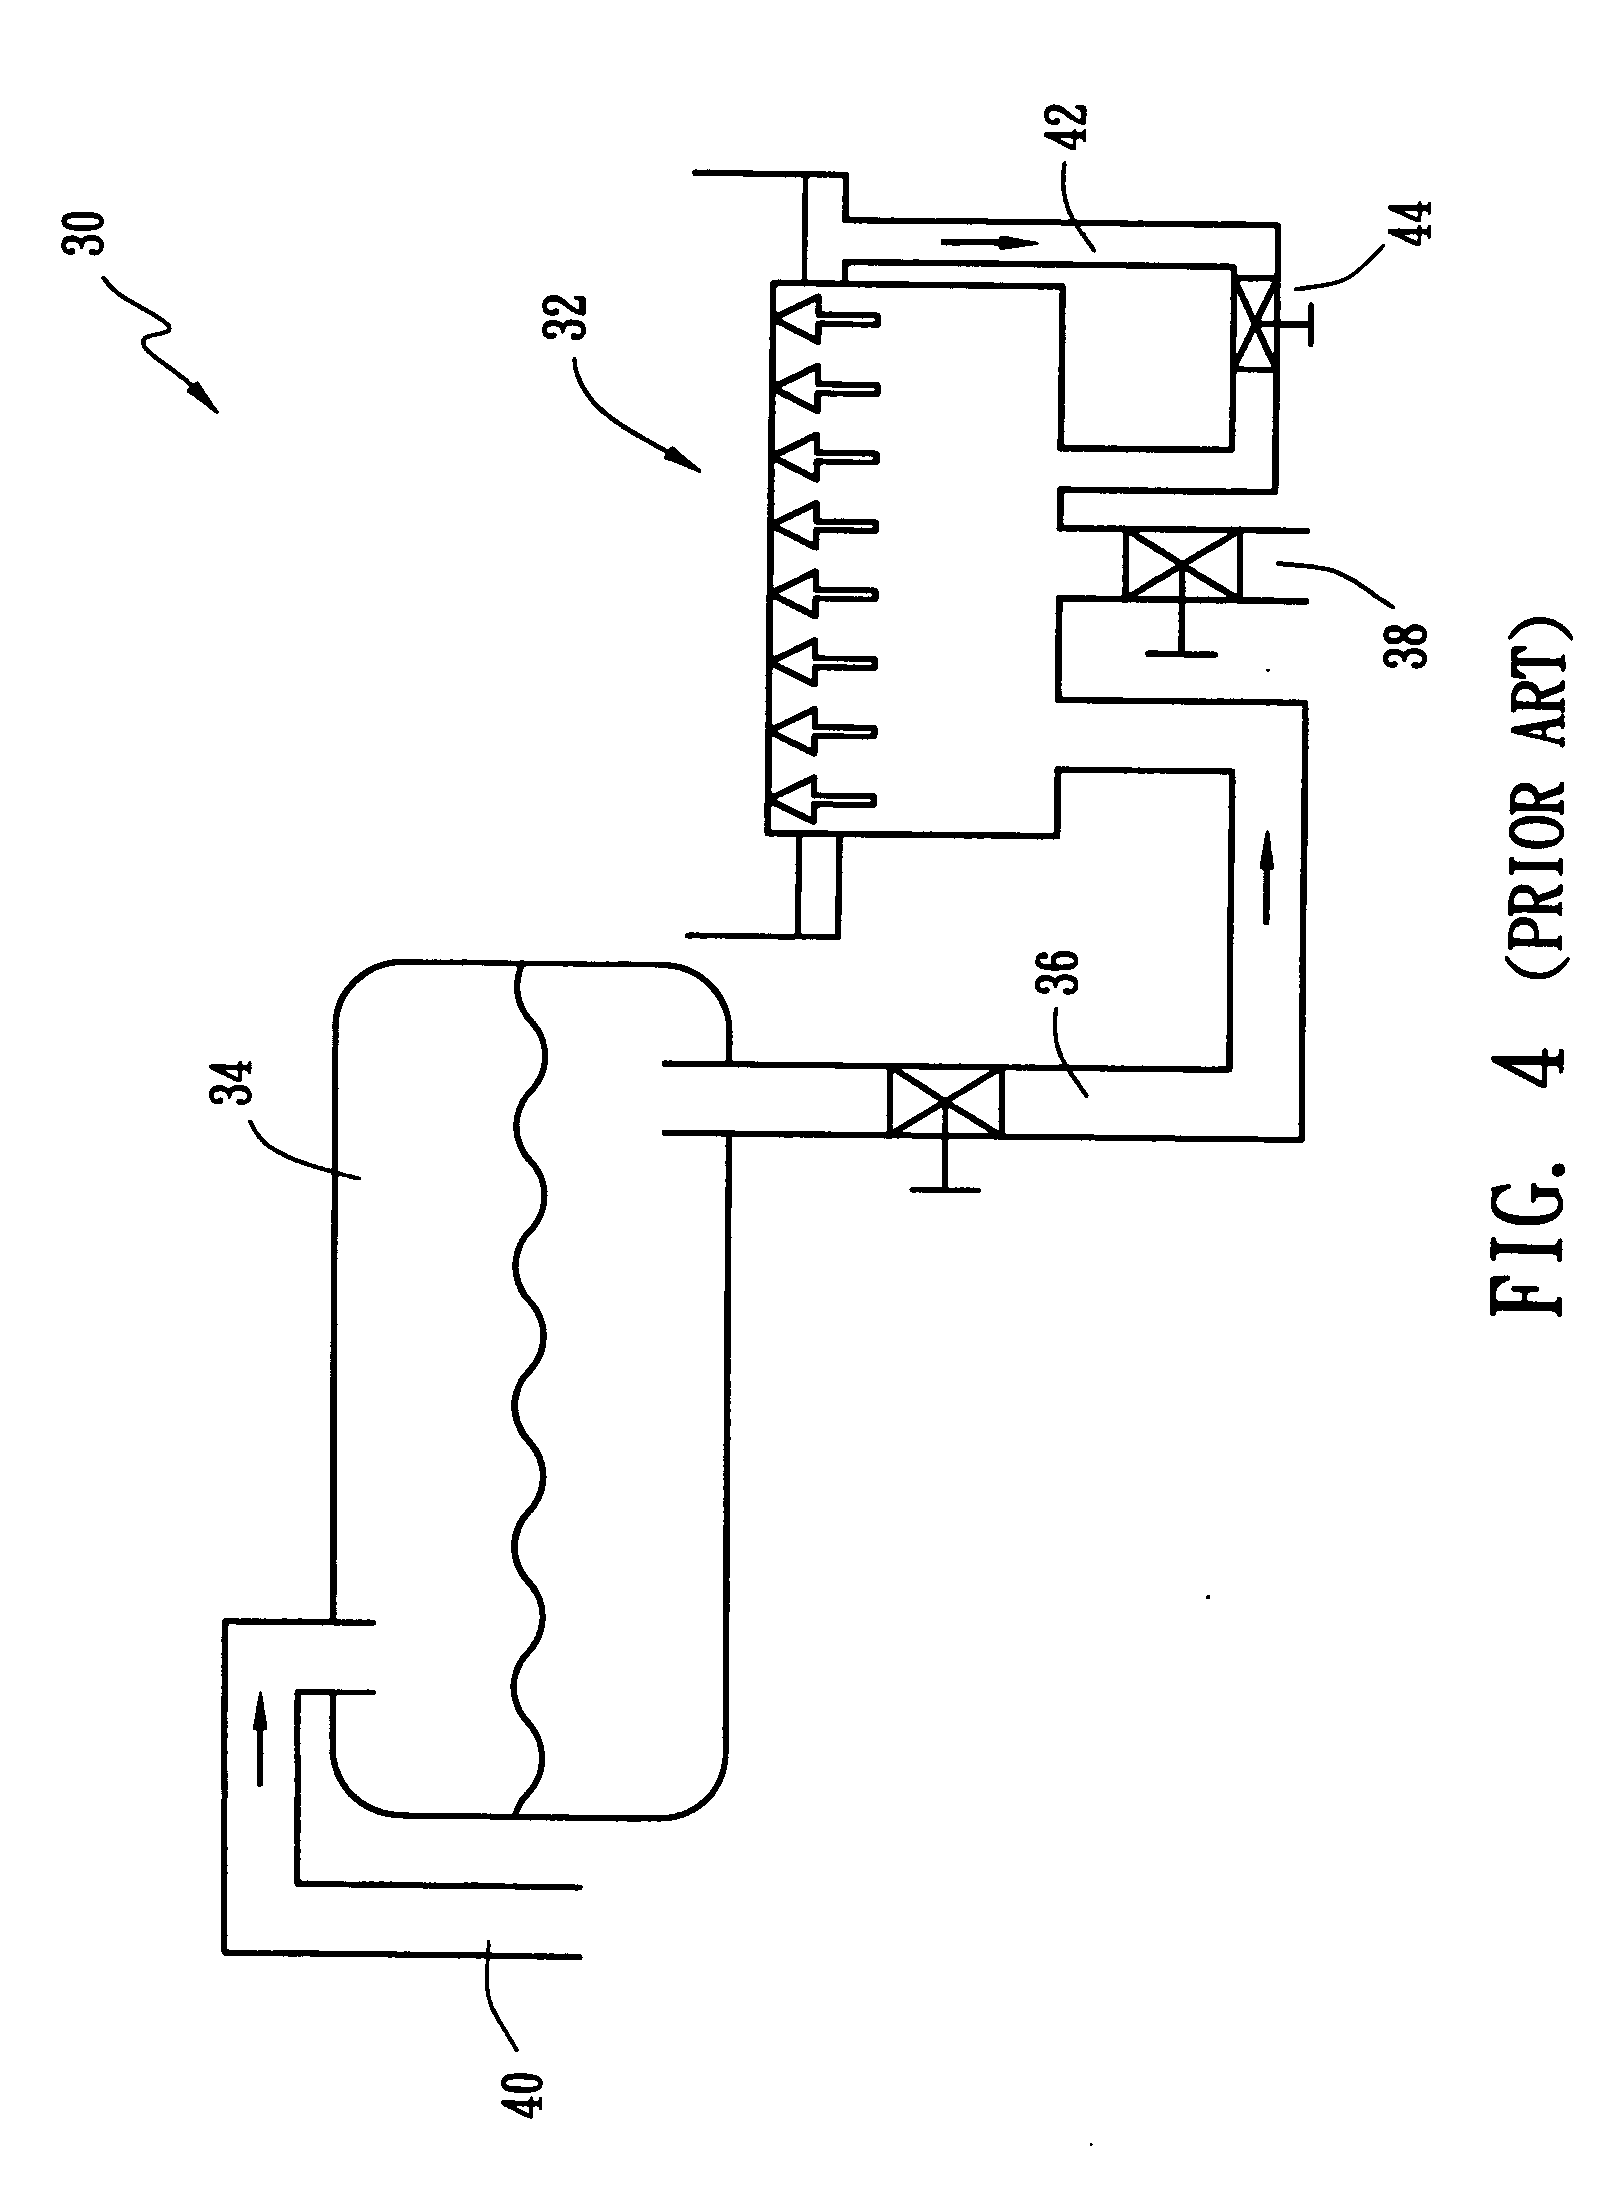 Method for treating the etching solution